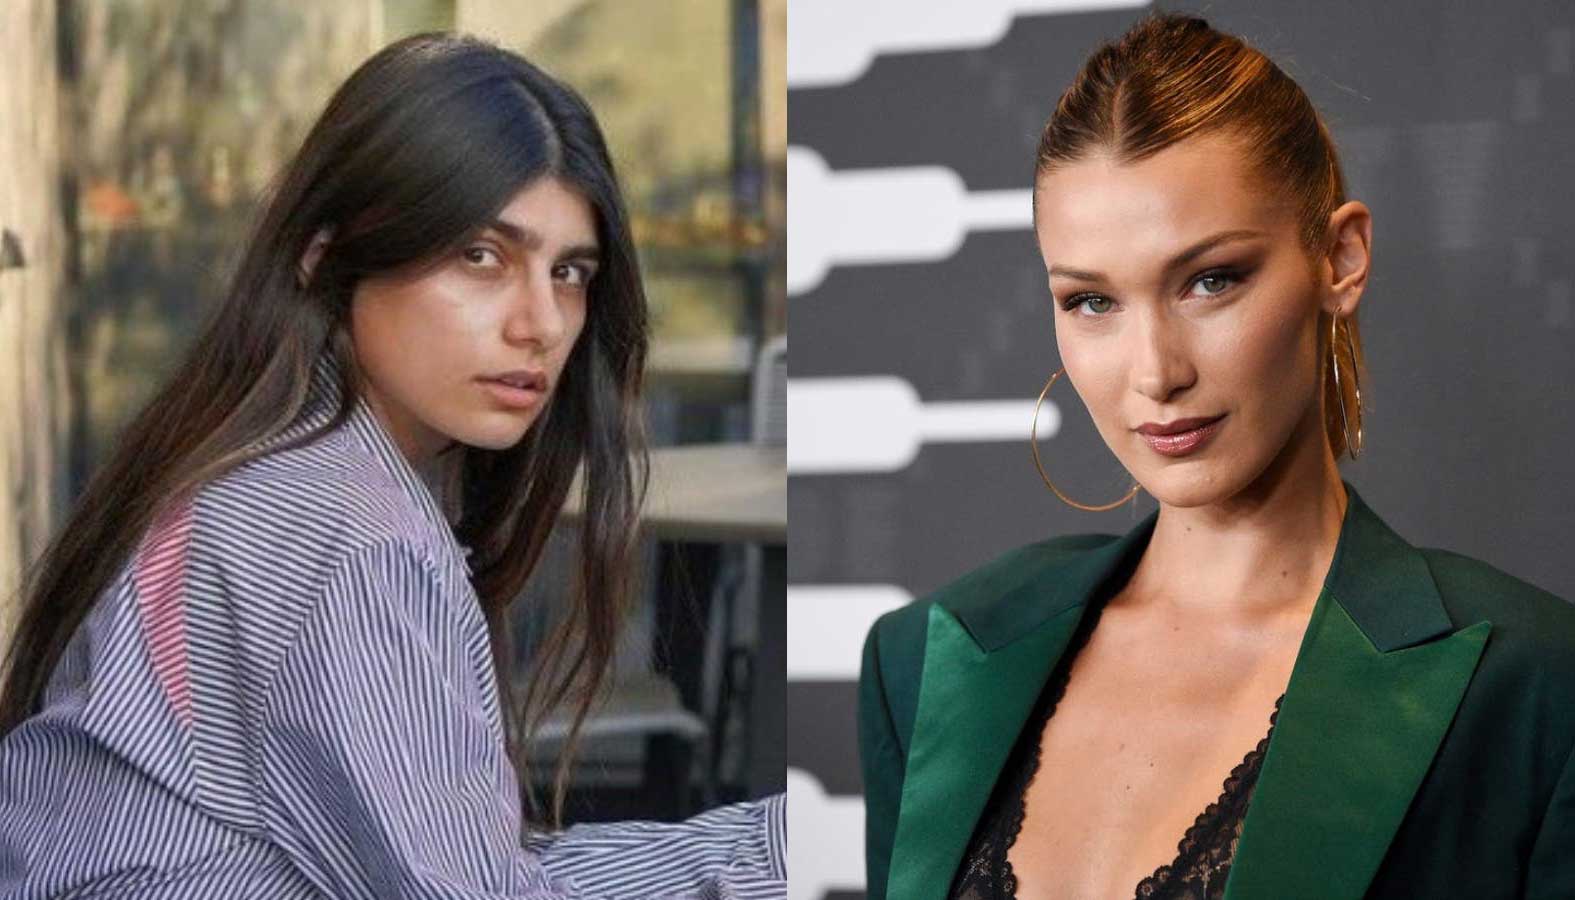 Mia Khalifa sides with Bella Hadid after allegedly losing contract over  pro-Palestine stance